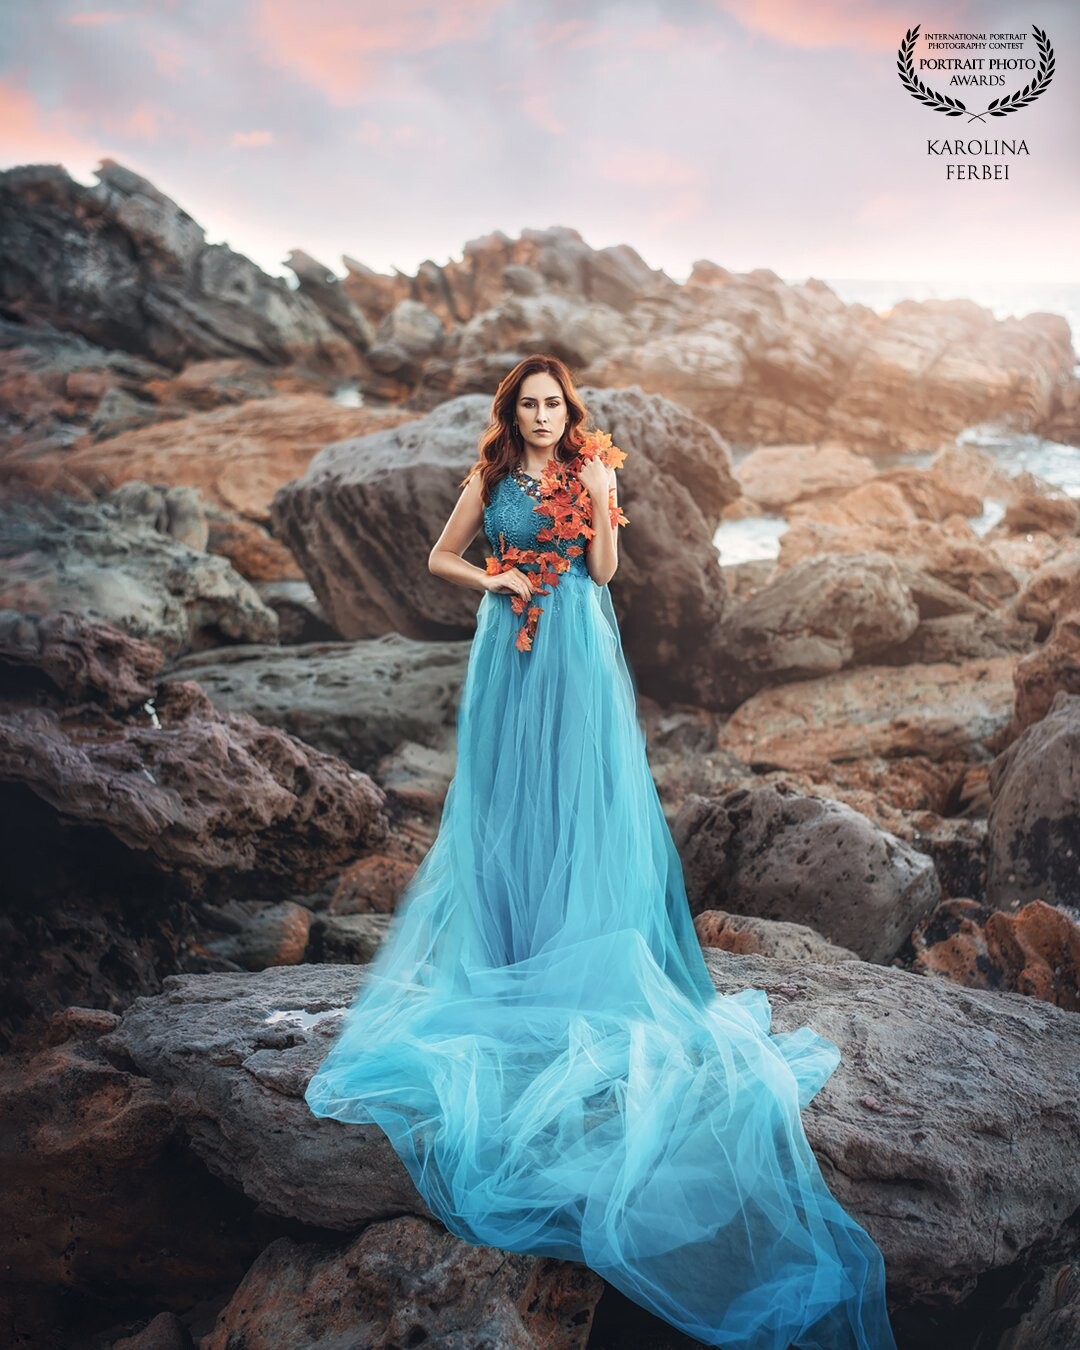 This beautiful location was an inspiration for this shot. Sky blue dress is going well with brown rocks and ocean's blue. <br />
It turned out to be a sort of sea goddess, who just came out on land.